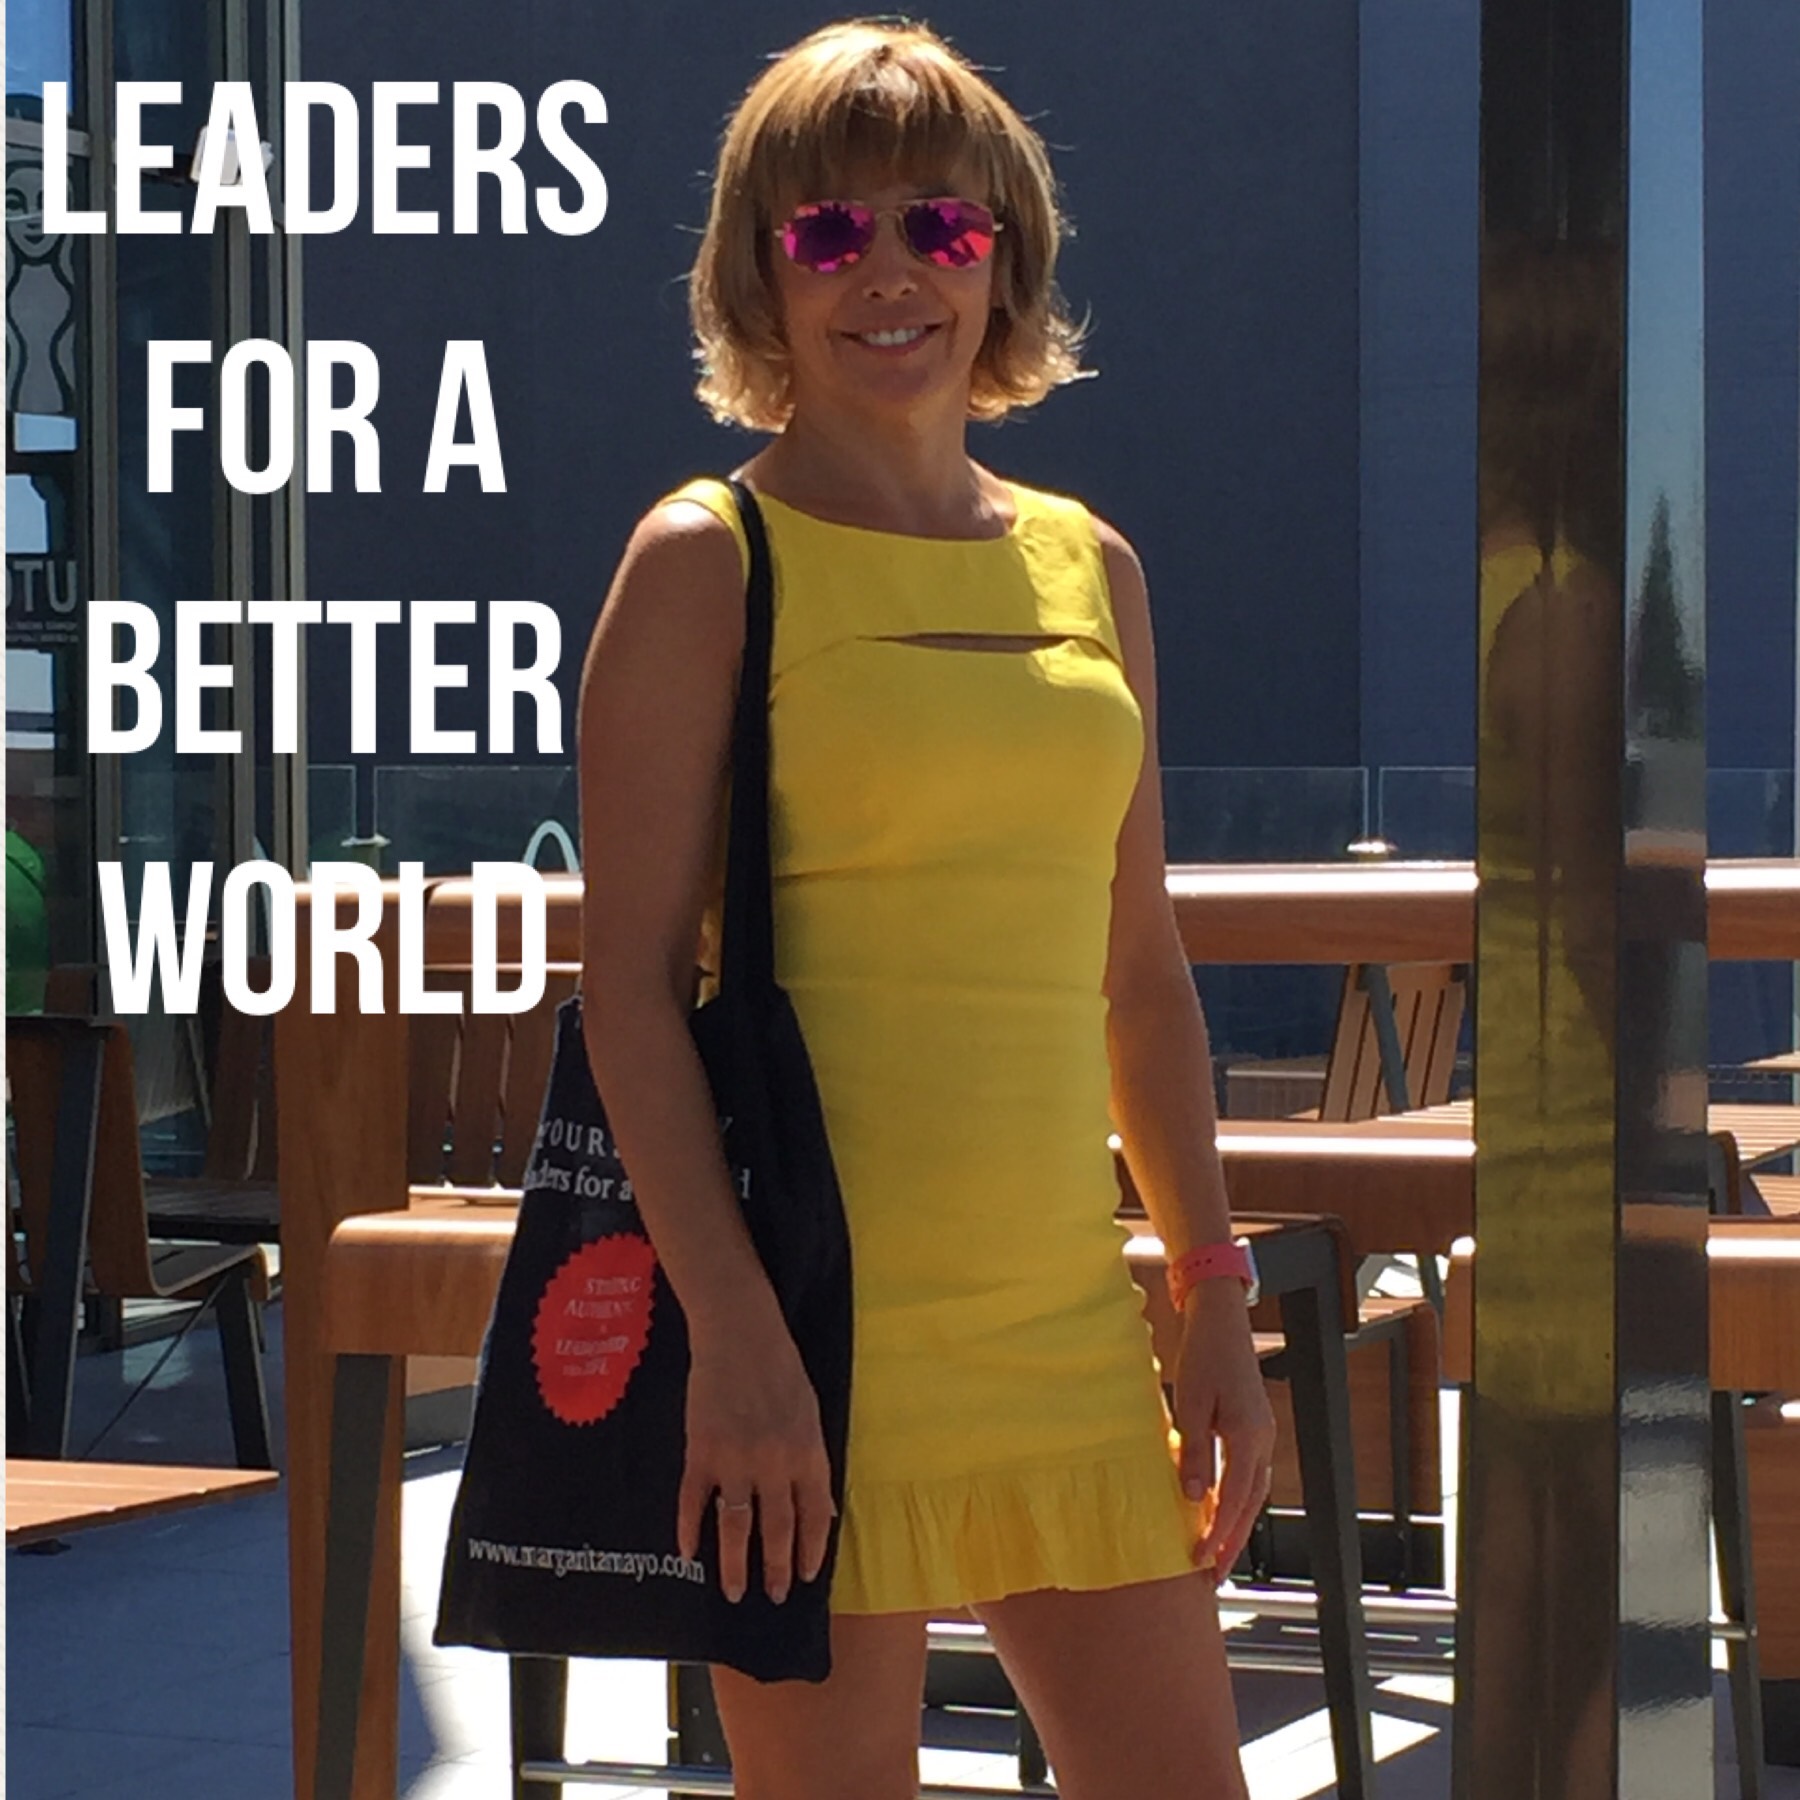 Leaders for a better world